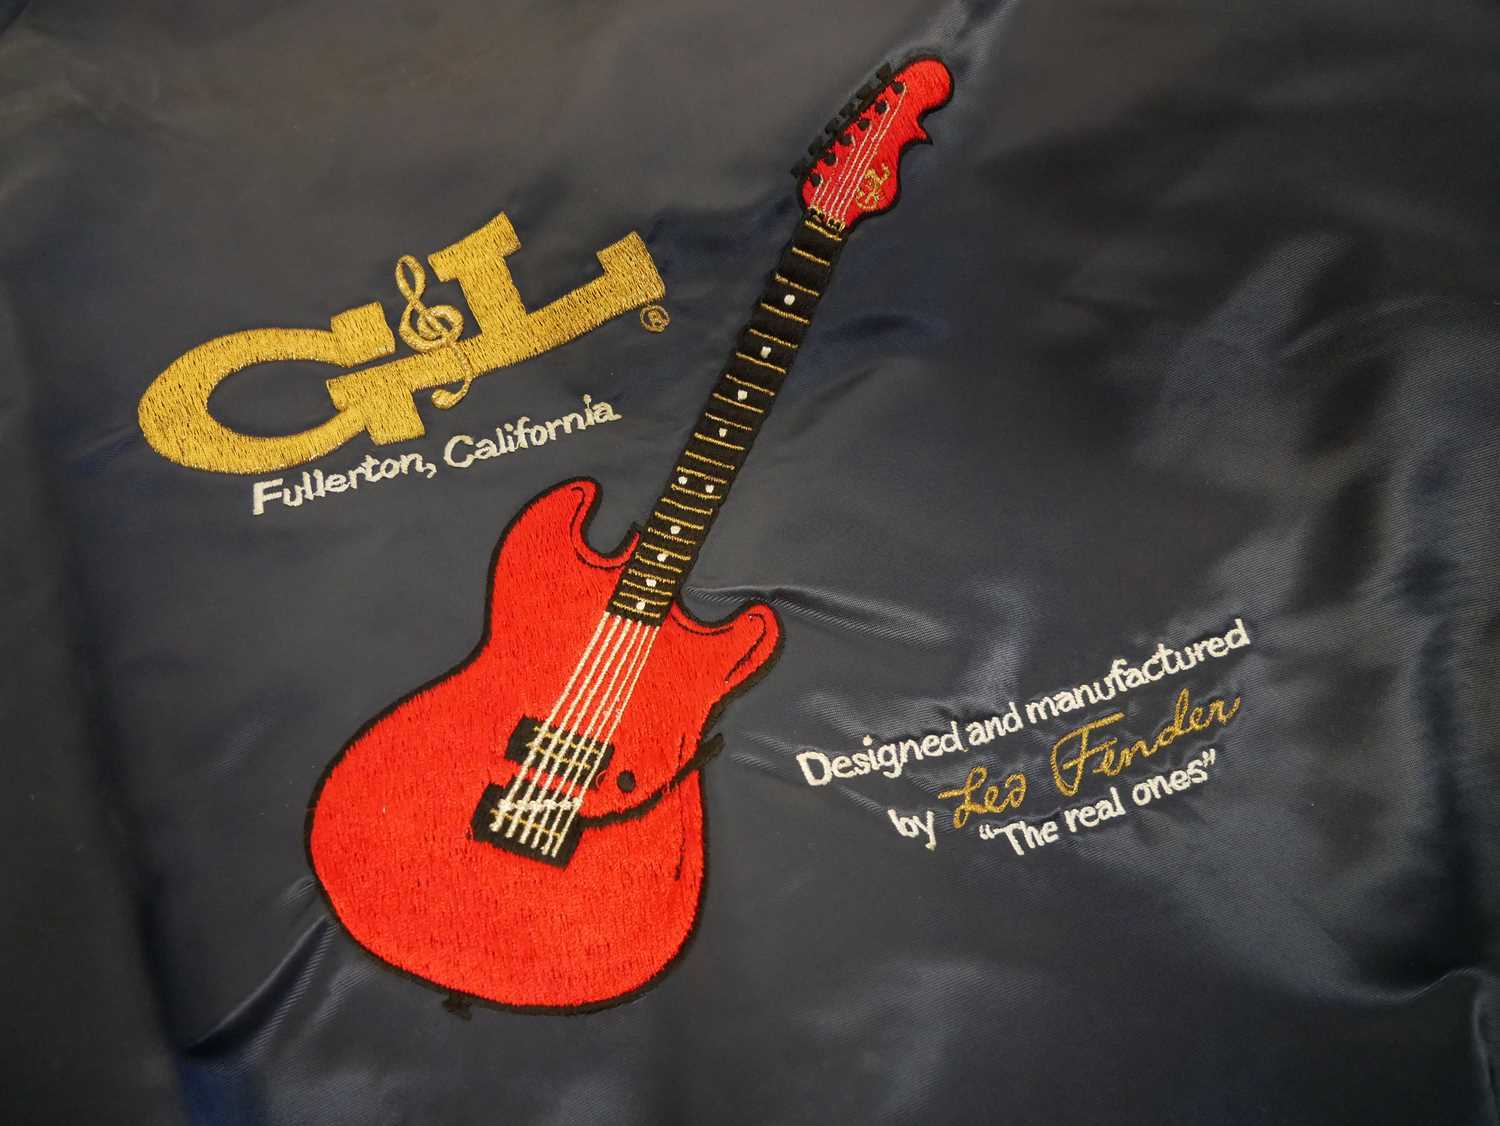 G&L Fender jacket, Fender Service manual and a pencil drawing of Leo Fender - Image 6 of 9